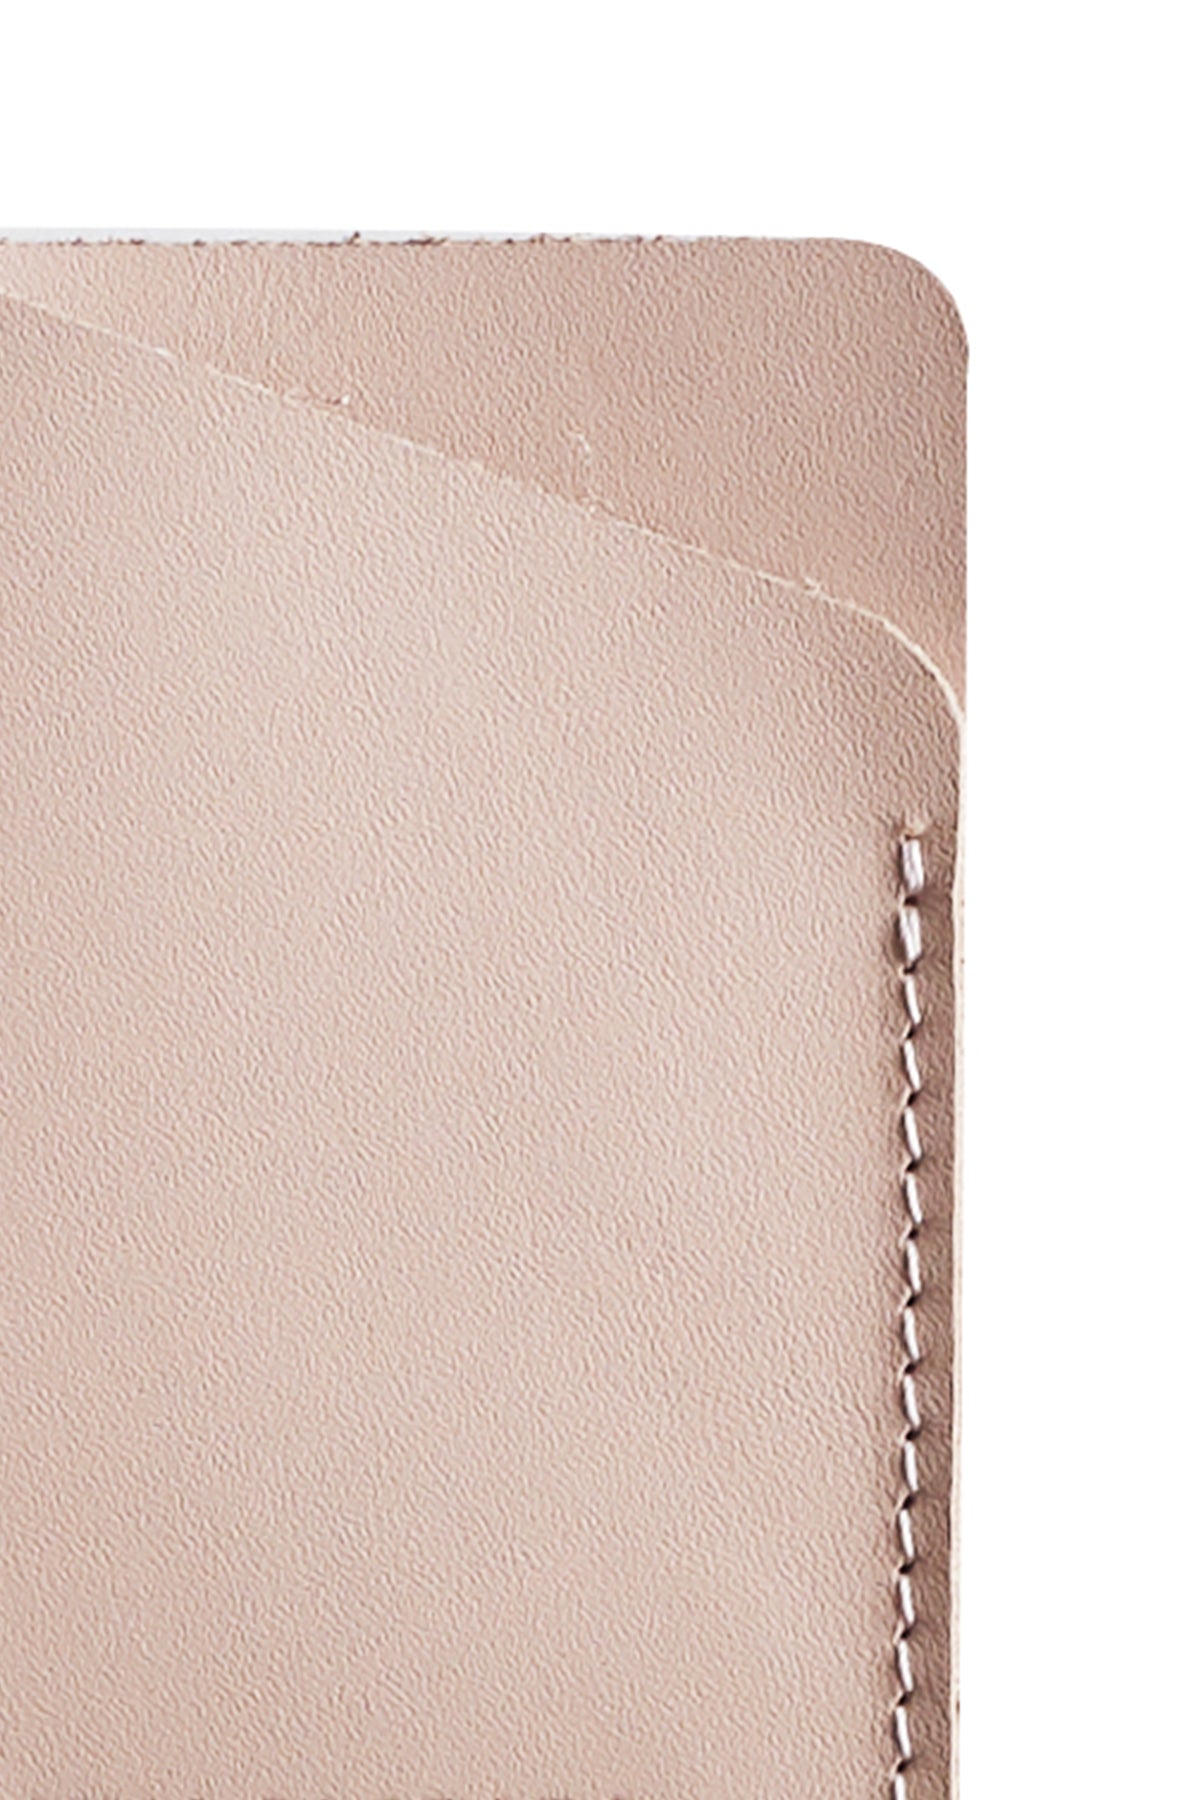   A beige SOFT LEATHER CARD HOLDER BY LIMA SAGRADA with a minimalist zipper, crafted by local artisans. 